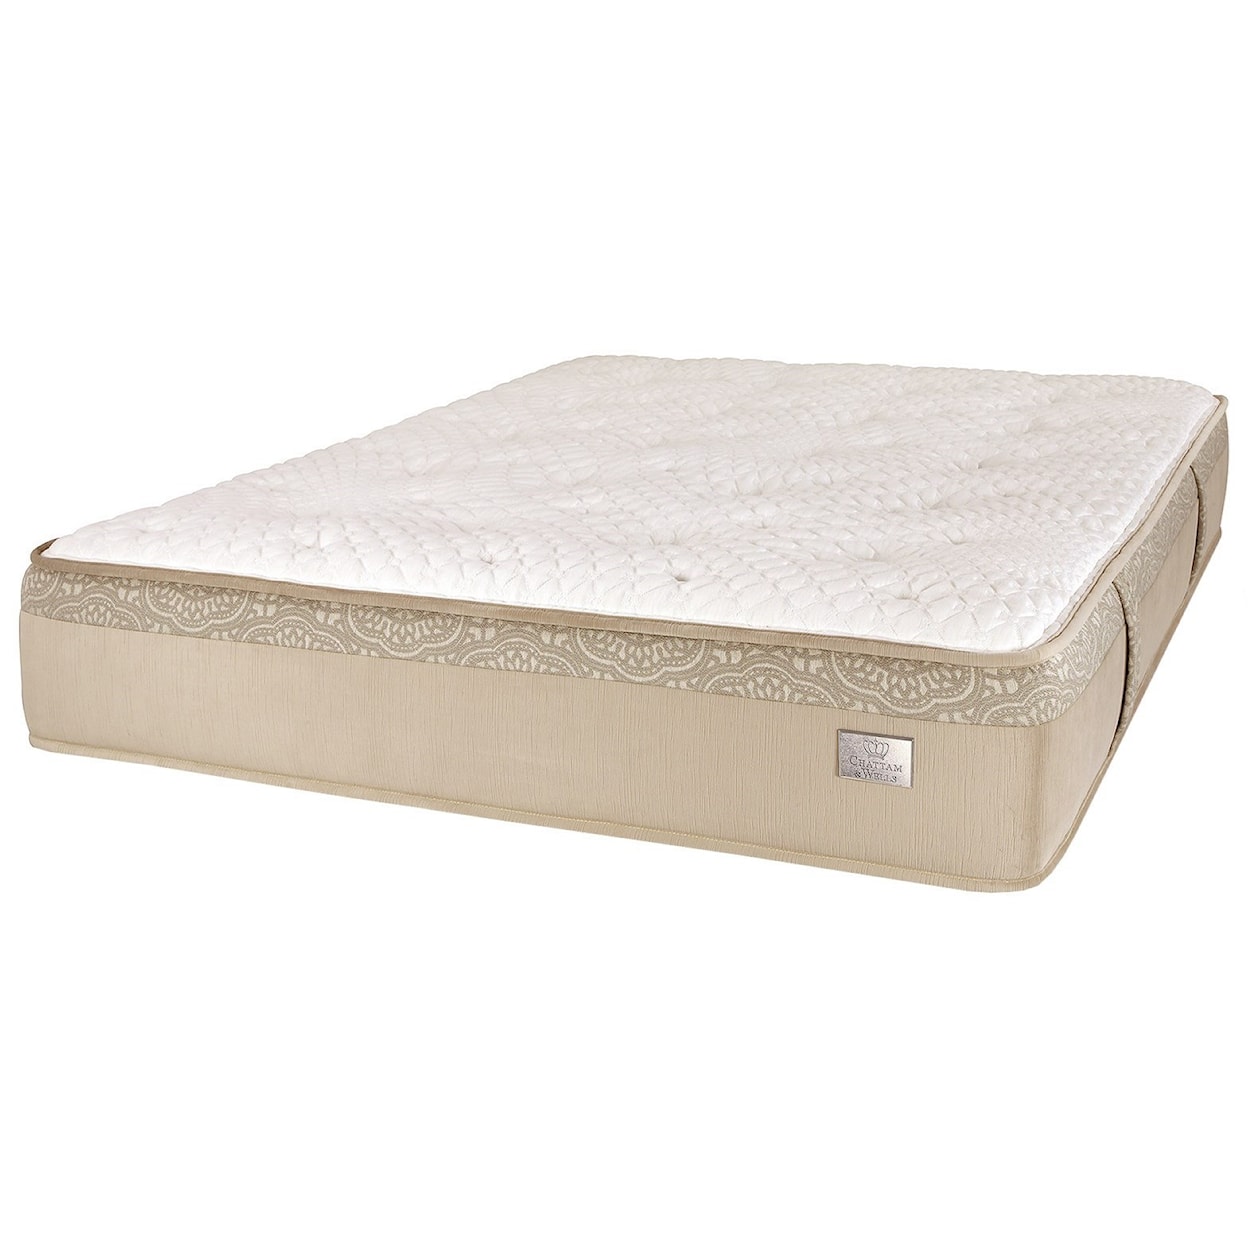 Spring Air Showstopper Firm Queen Pocketed Coil Mattress